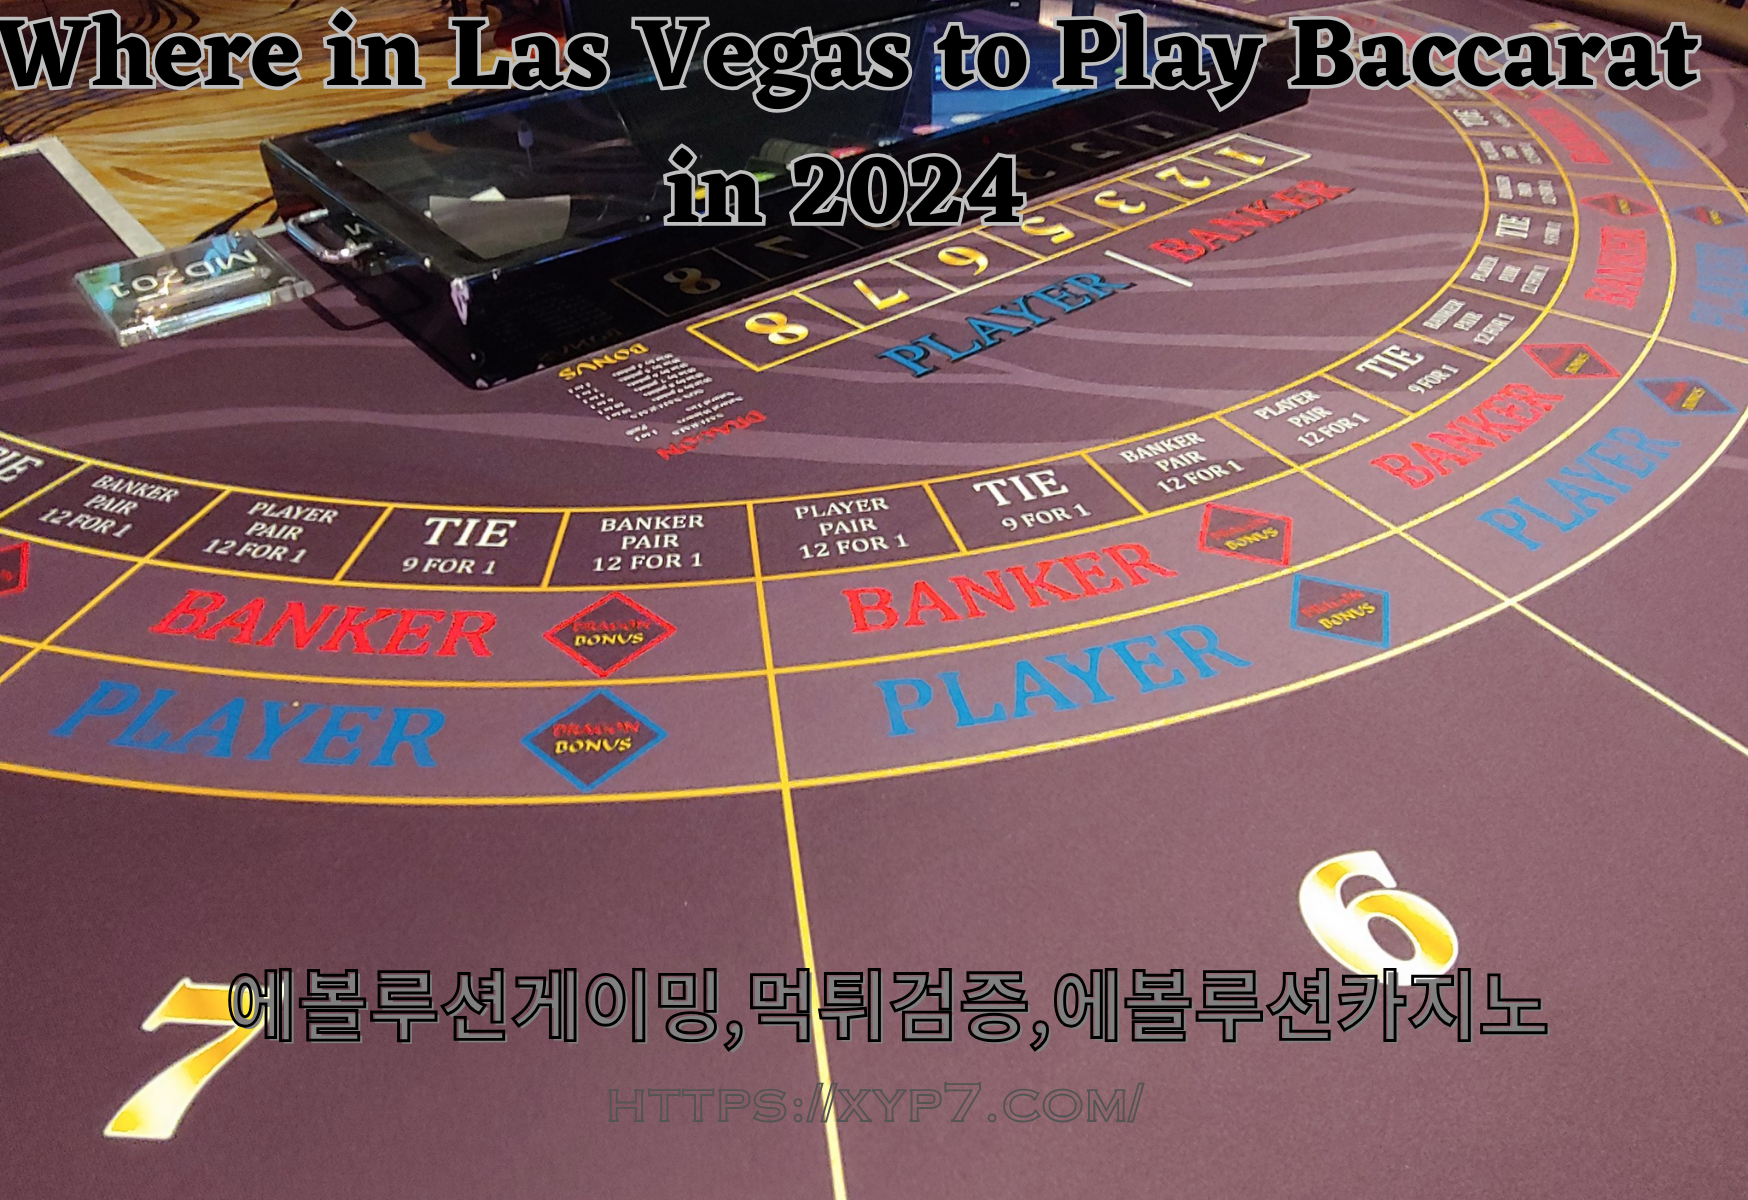 Where in Las Vegas to Play Baccarat in 2024?